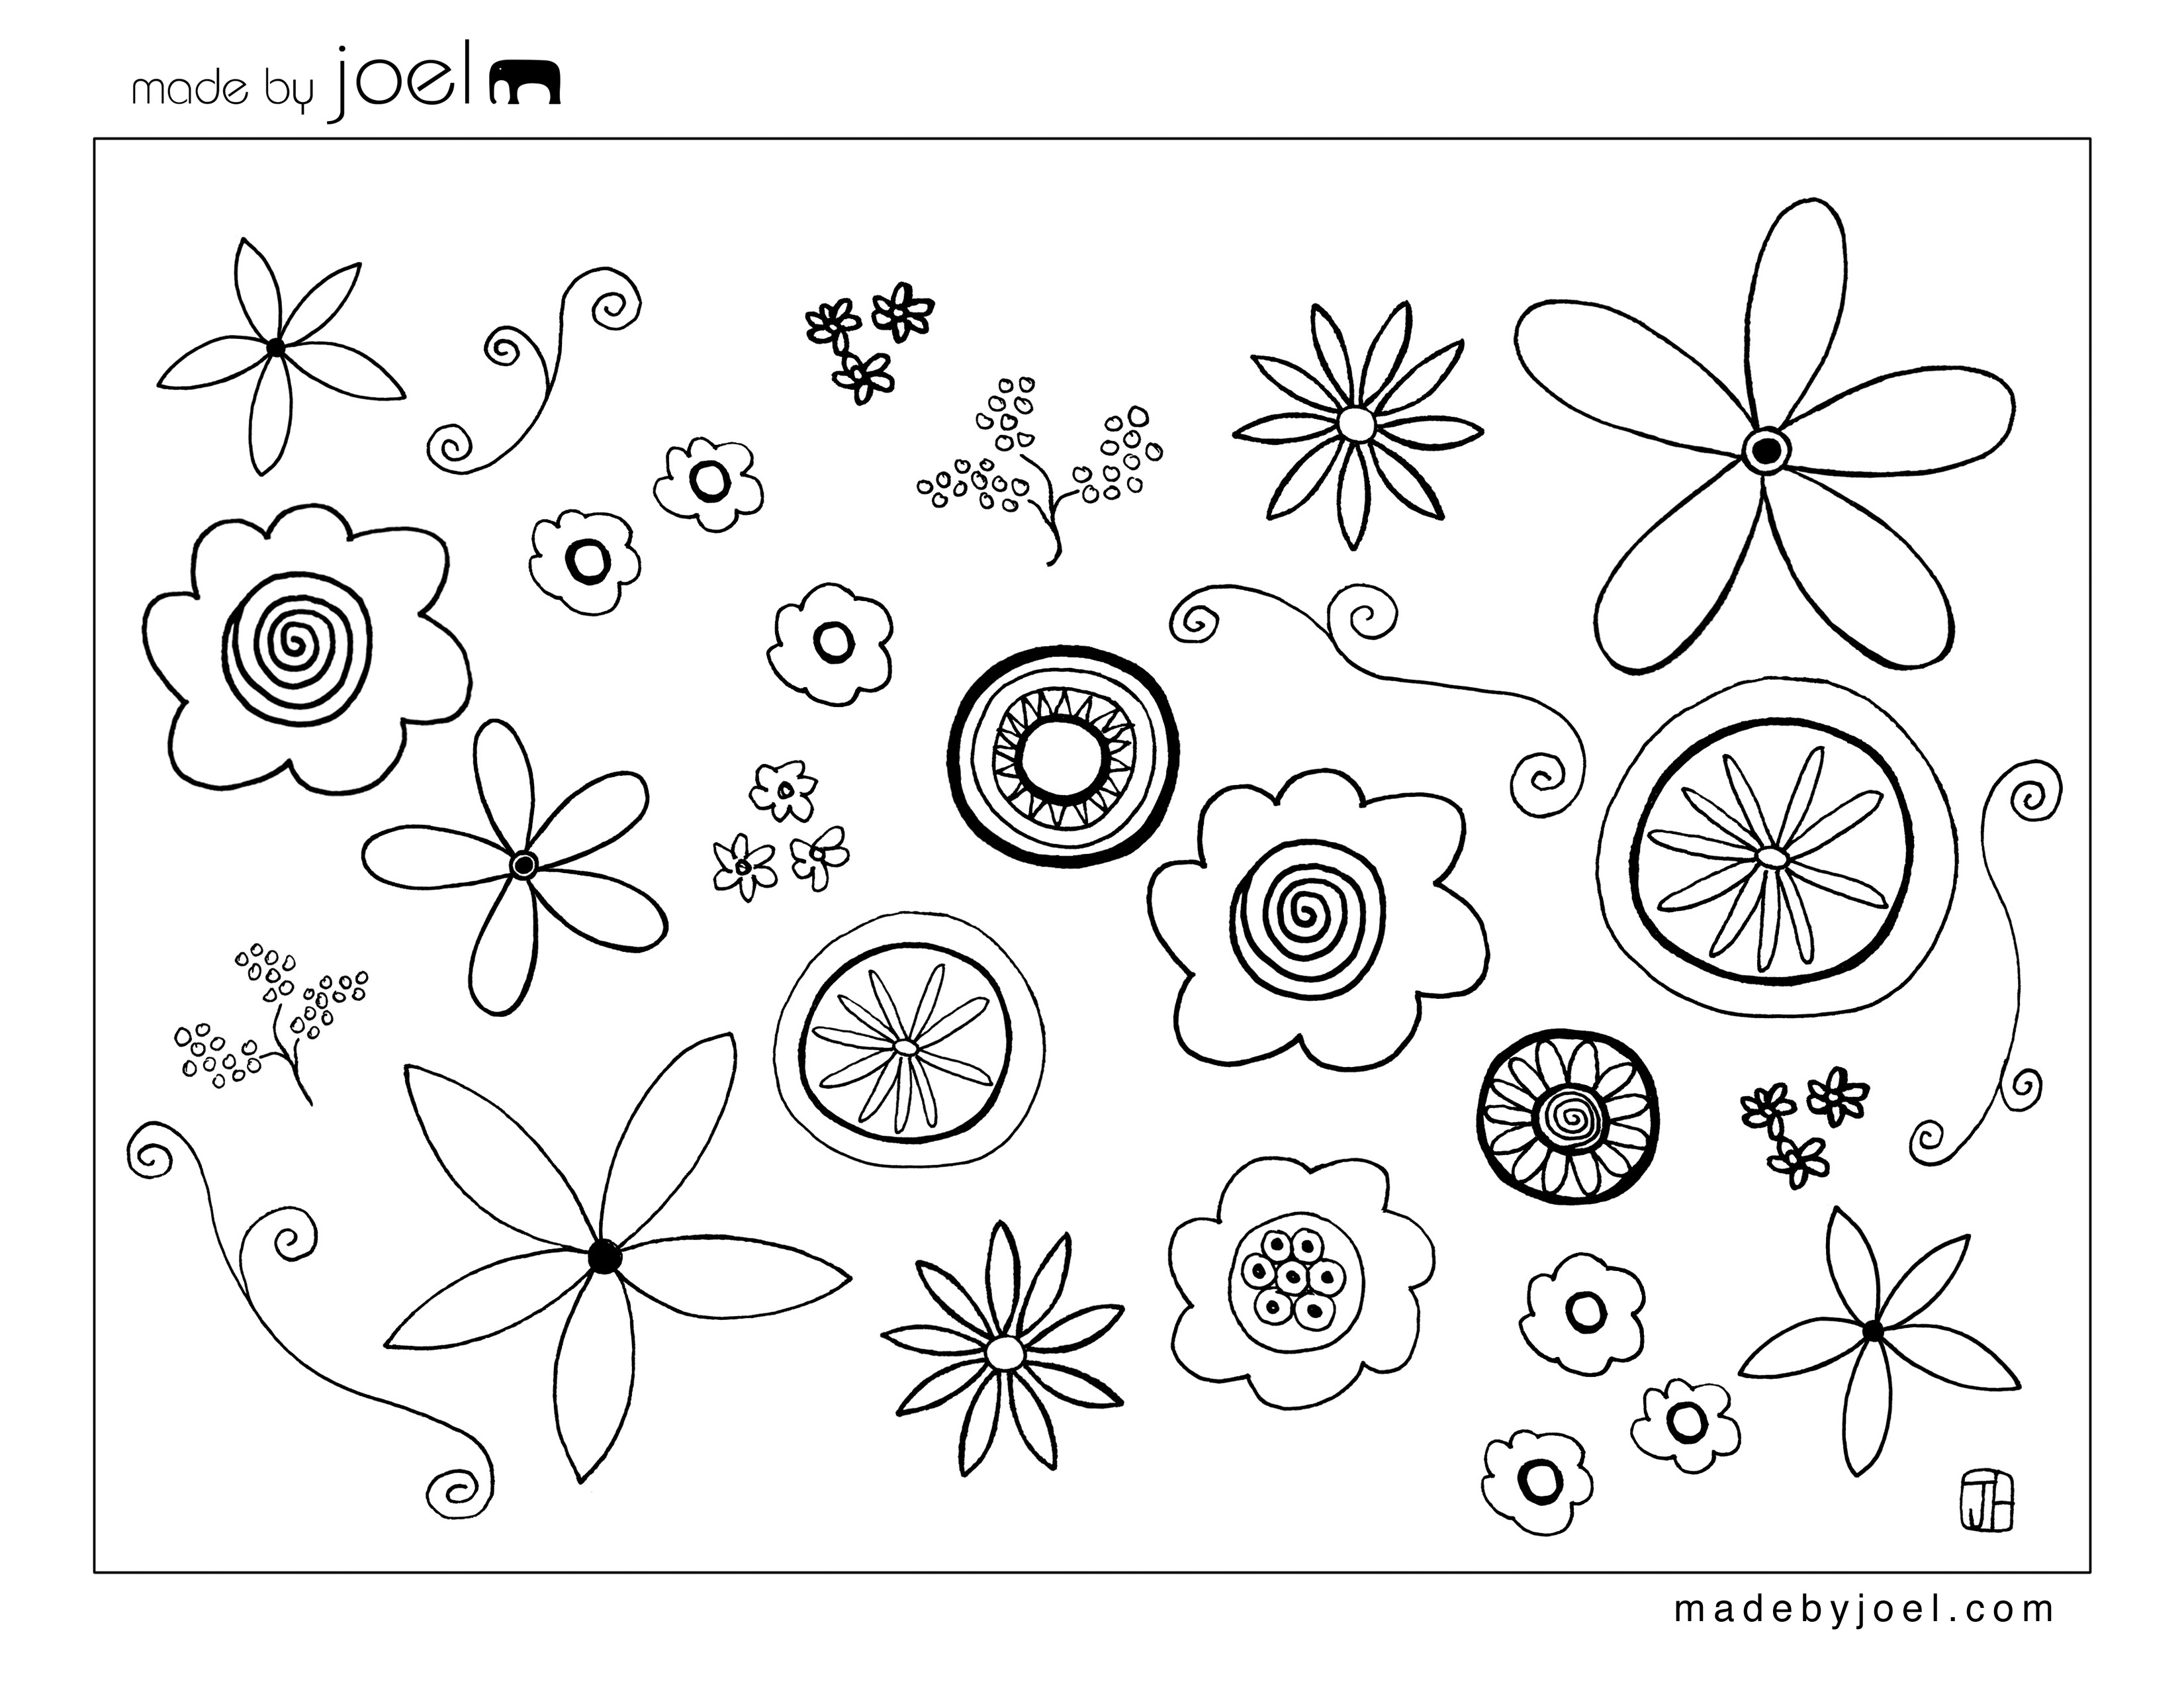 Free Flower Template To Colour, Download Free Flower Template To ...